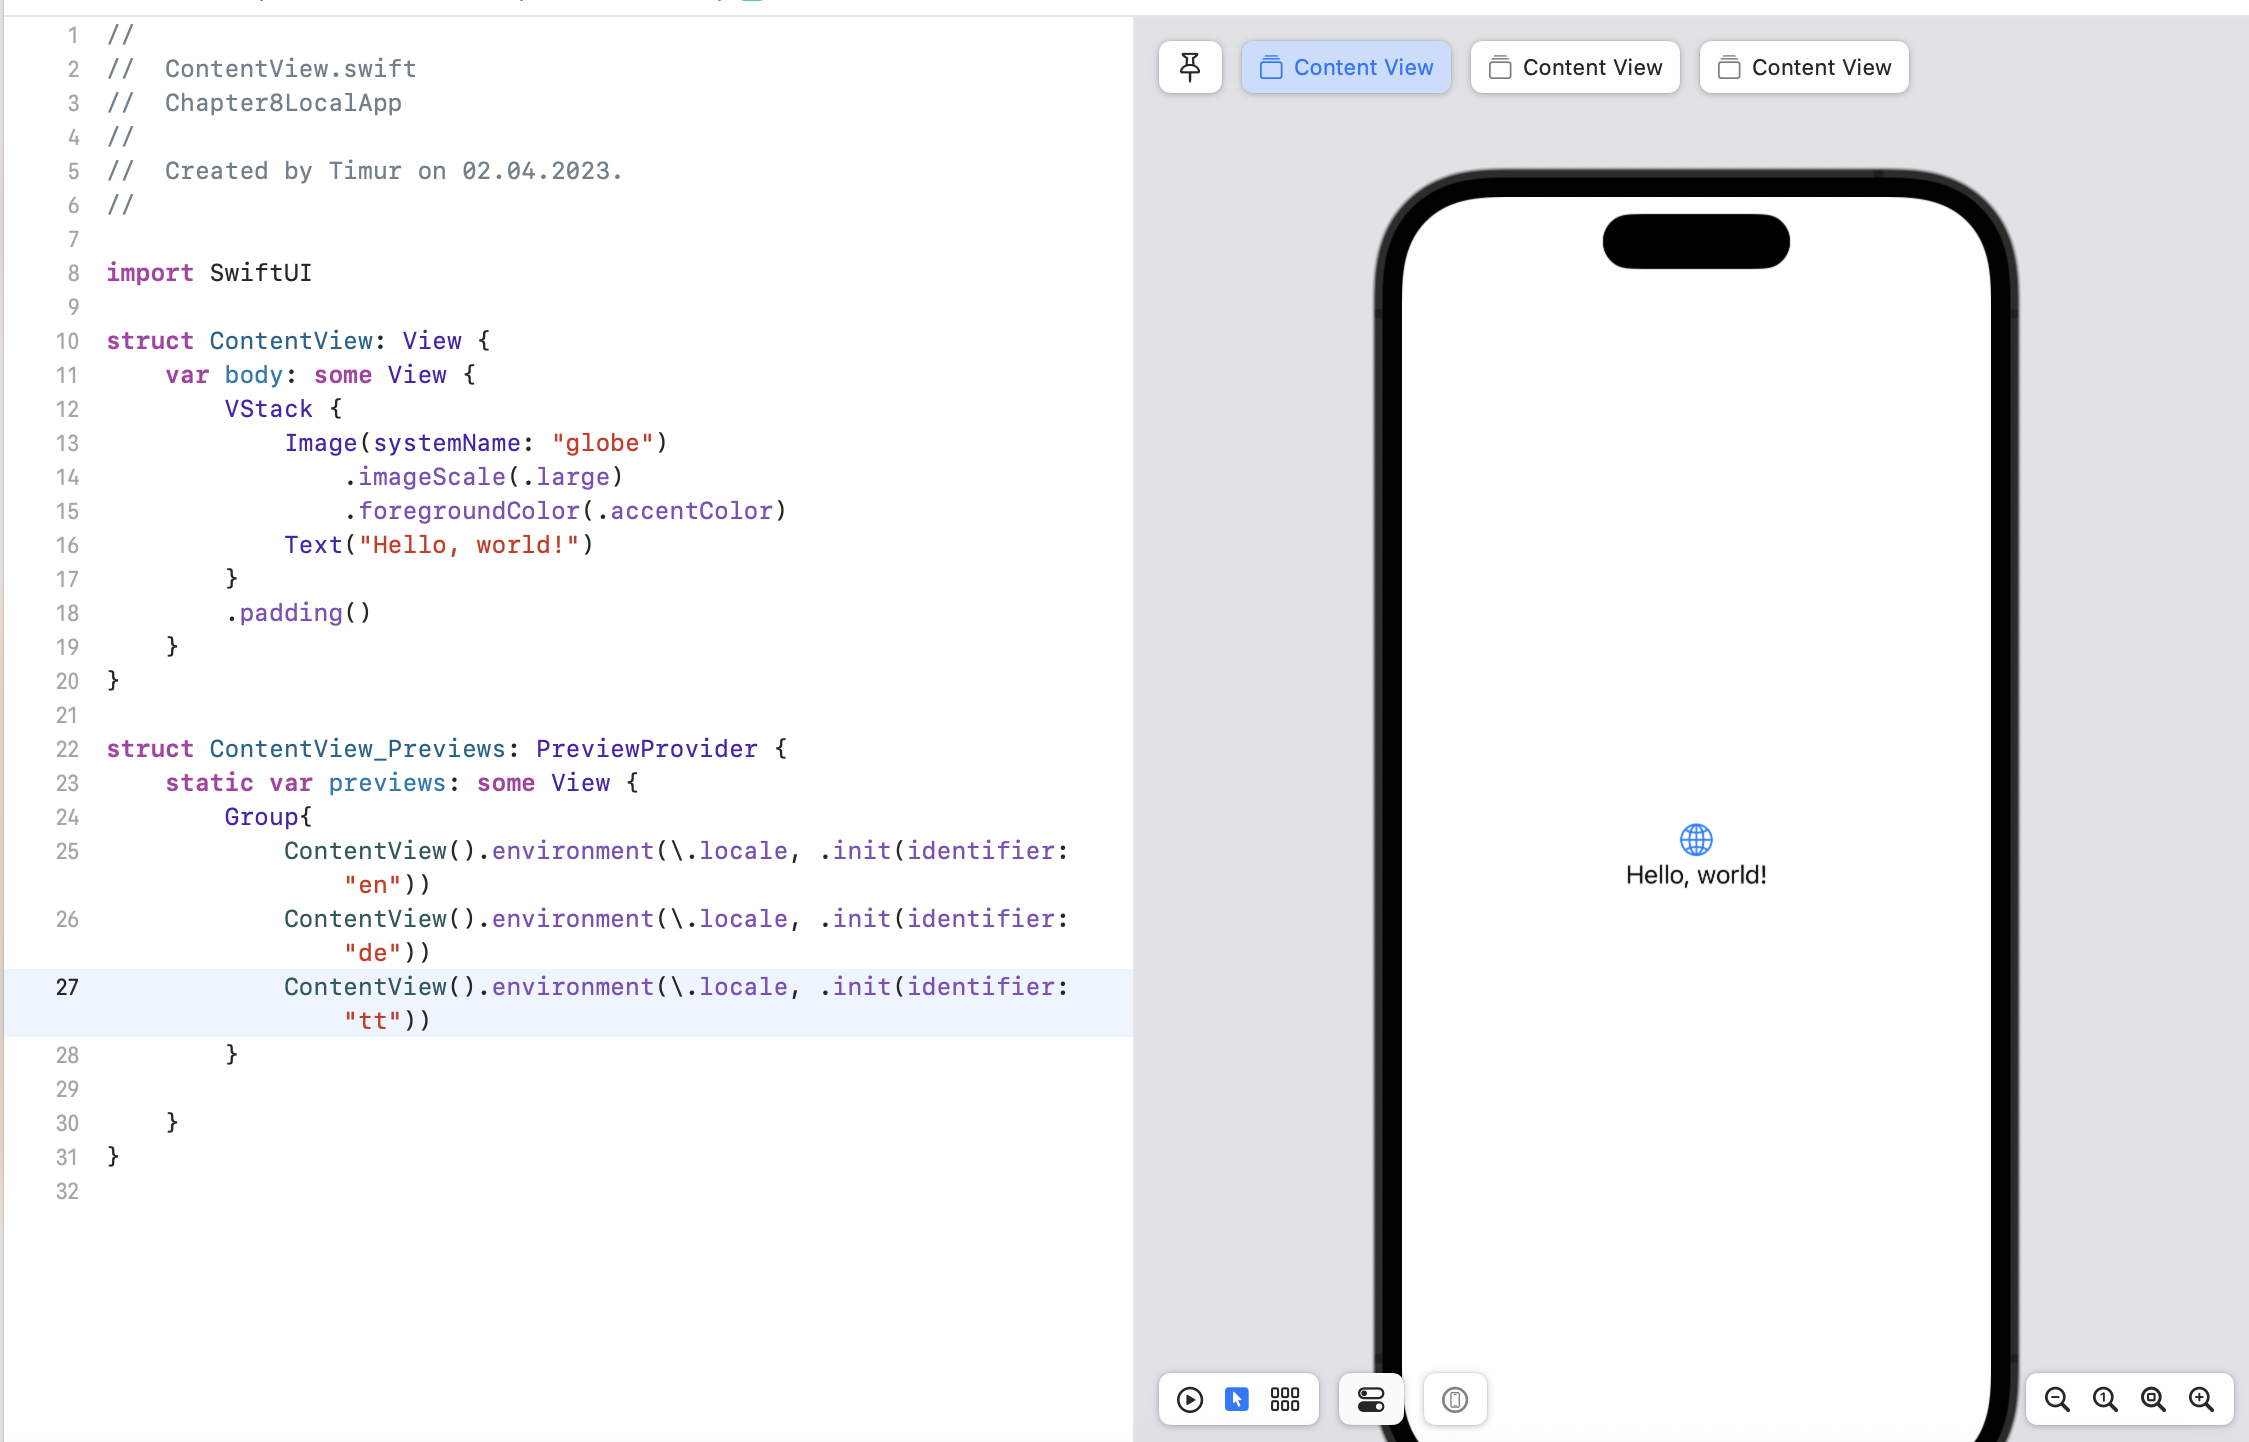 XCode canvas pane can display multiple iOs simulated screens